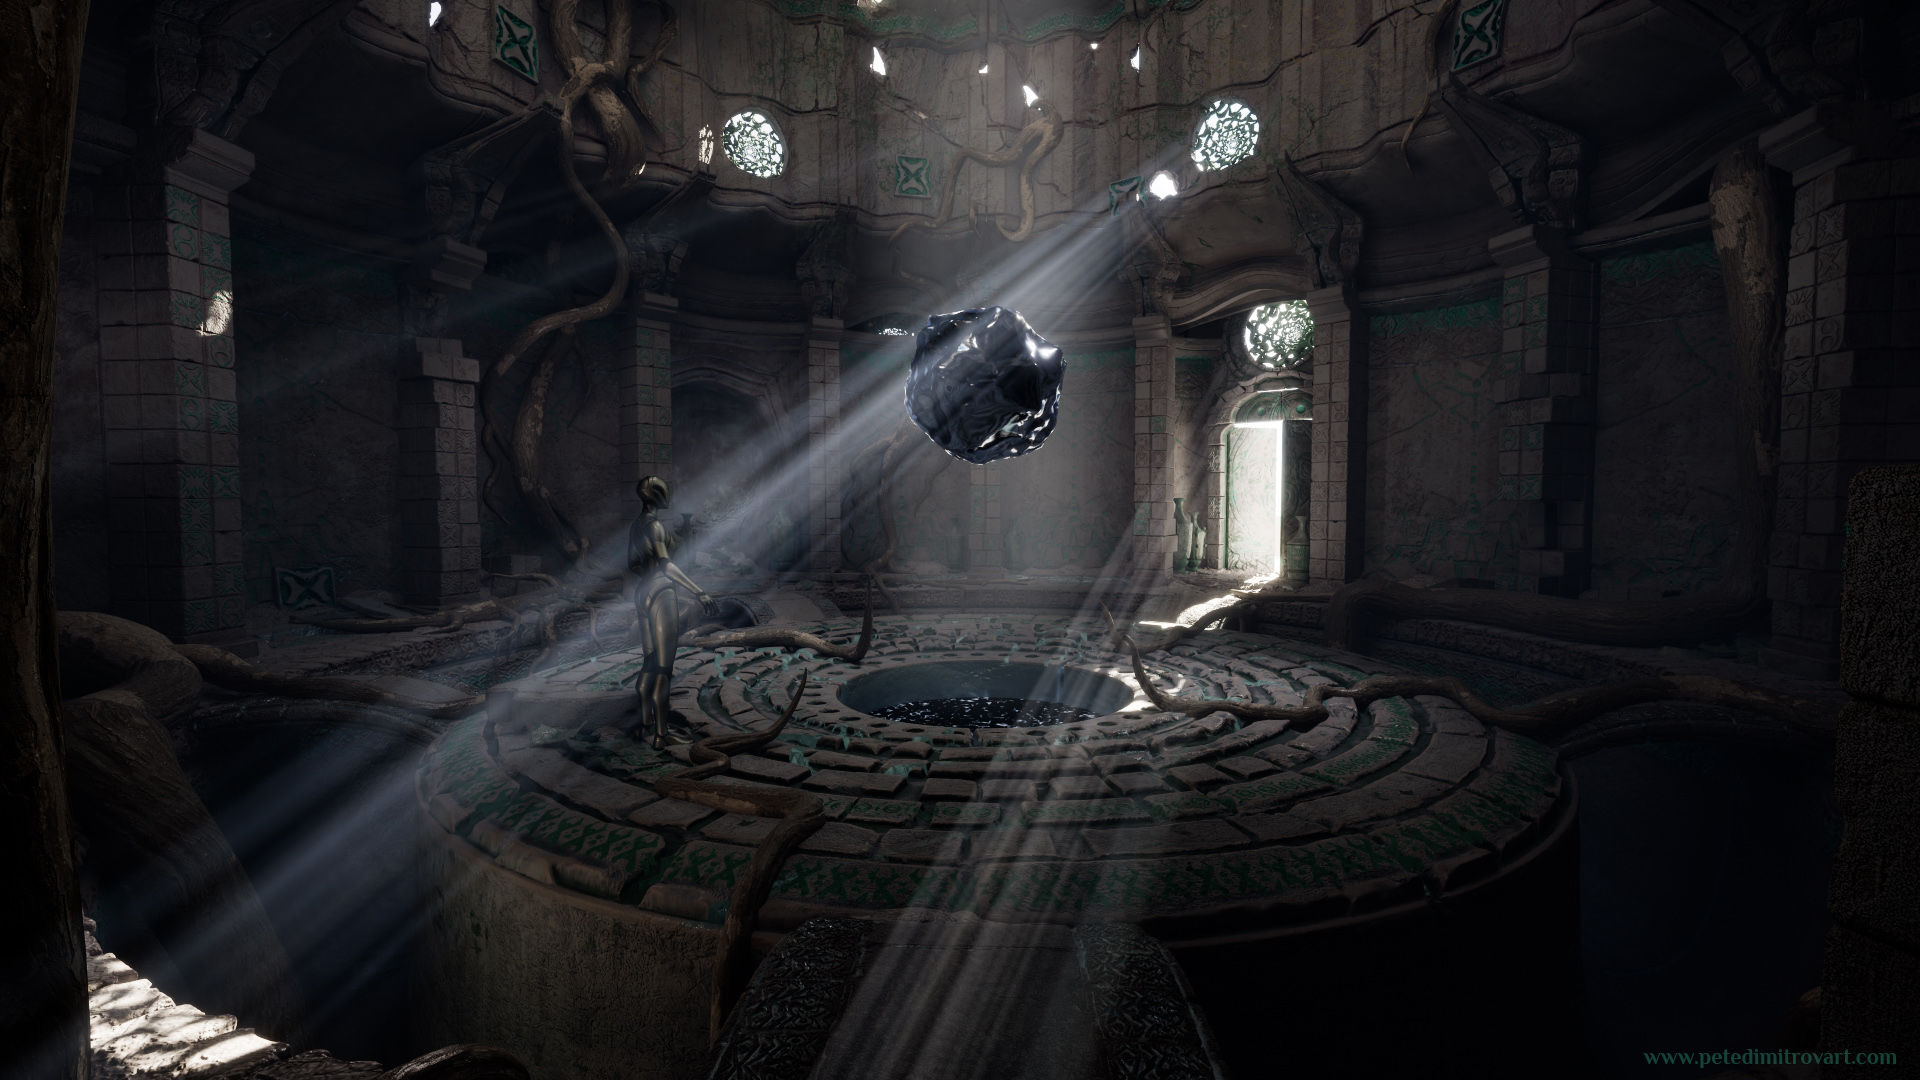 Screenshot from the usual main angle in the environment. Showcases a floating, black orb with metal surface. It shines brightly in a day light cast from a door that is ajar and from the cracks on the walls. The orb is above a circular, ruined platform with a basin with black goo in the middle. Roots crawl on the walls. Unreal Engine 5.